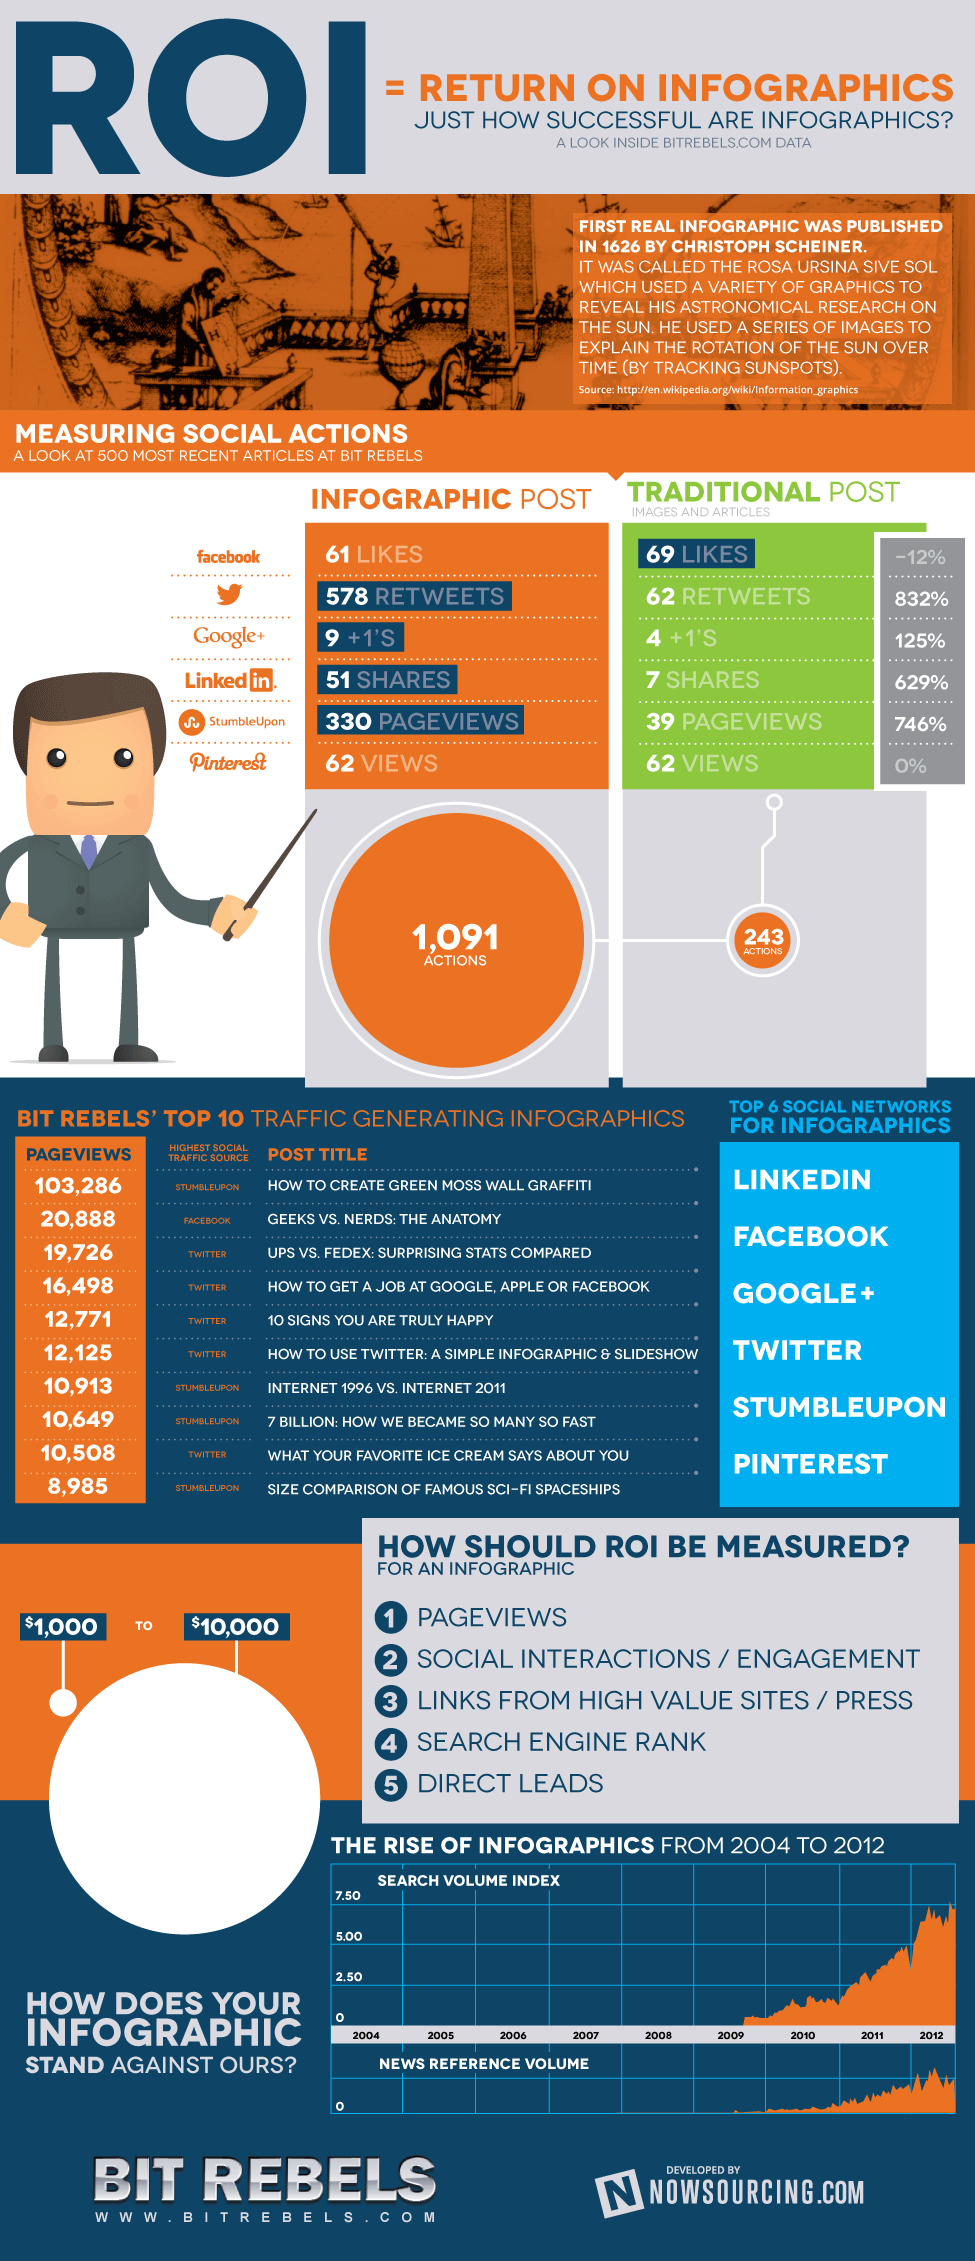 An infographic that illustrates the return on investment ROI that infographics online generate for businesses that use them